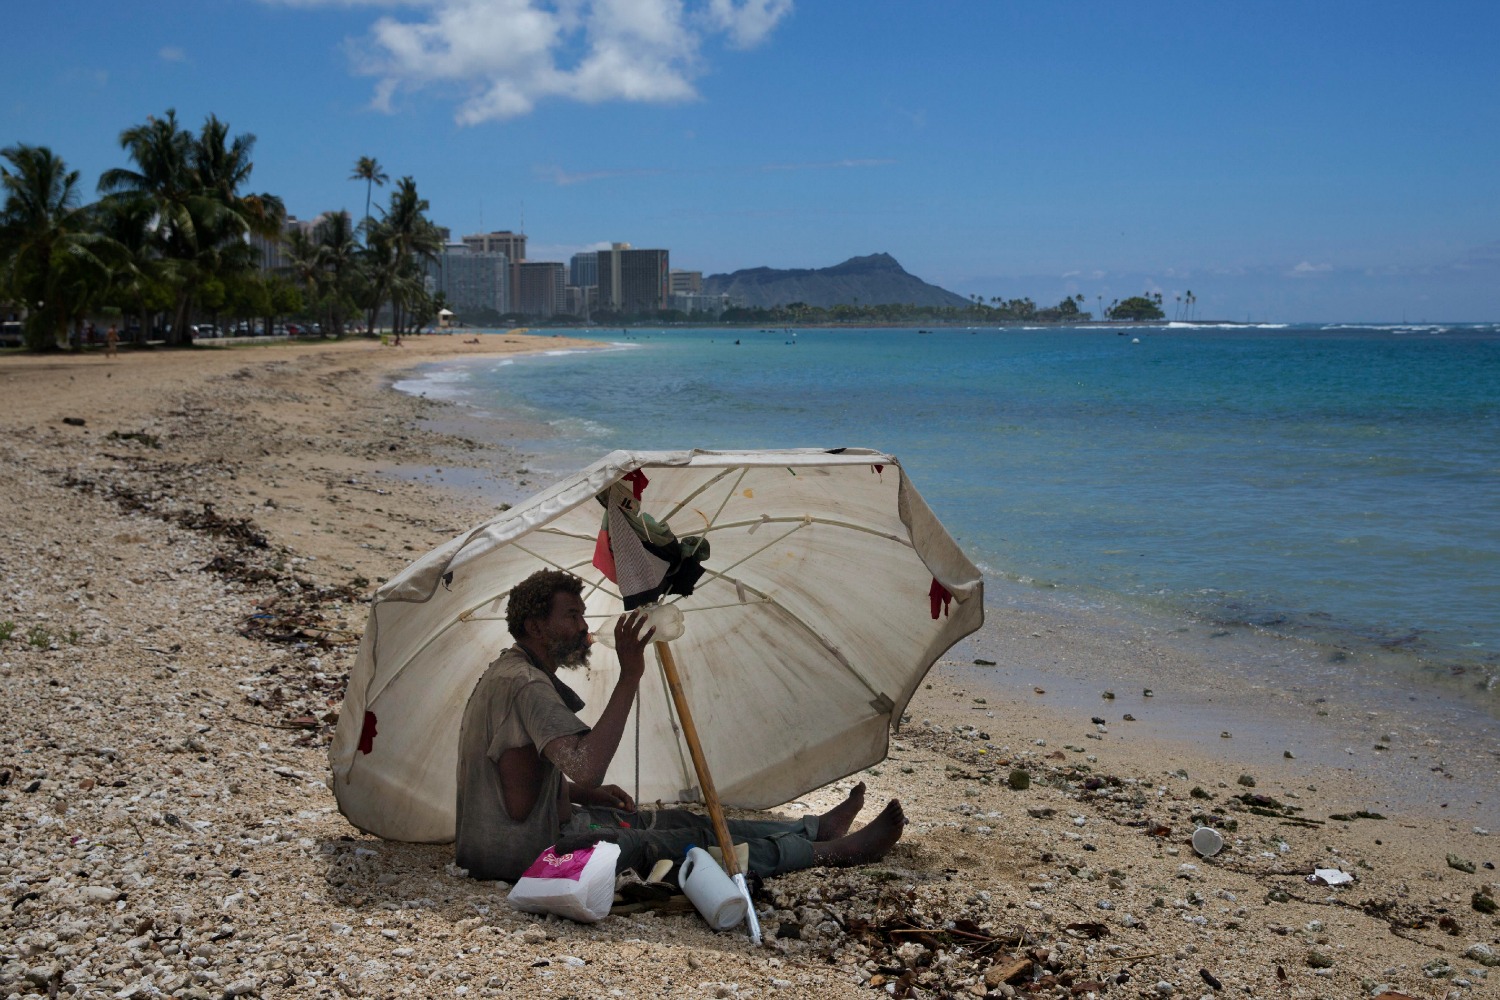 Hawaii is no longer paradise: number of homeless rises 61% since 2000